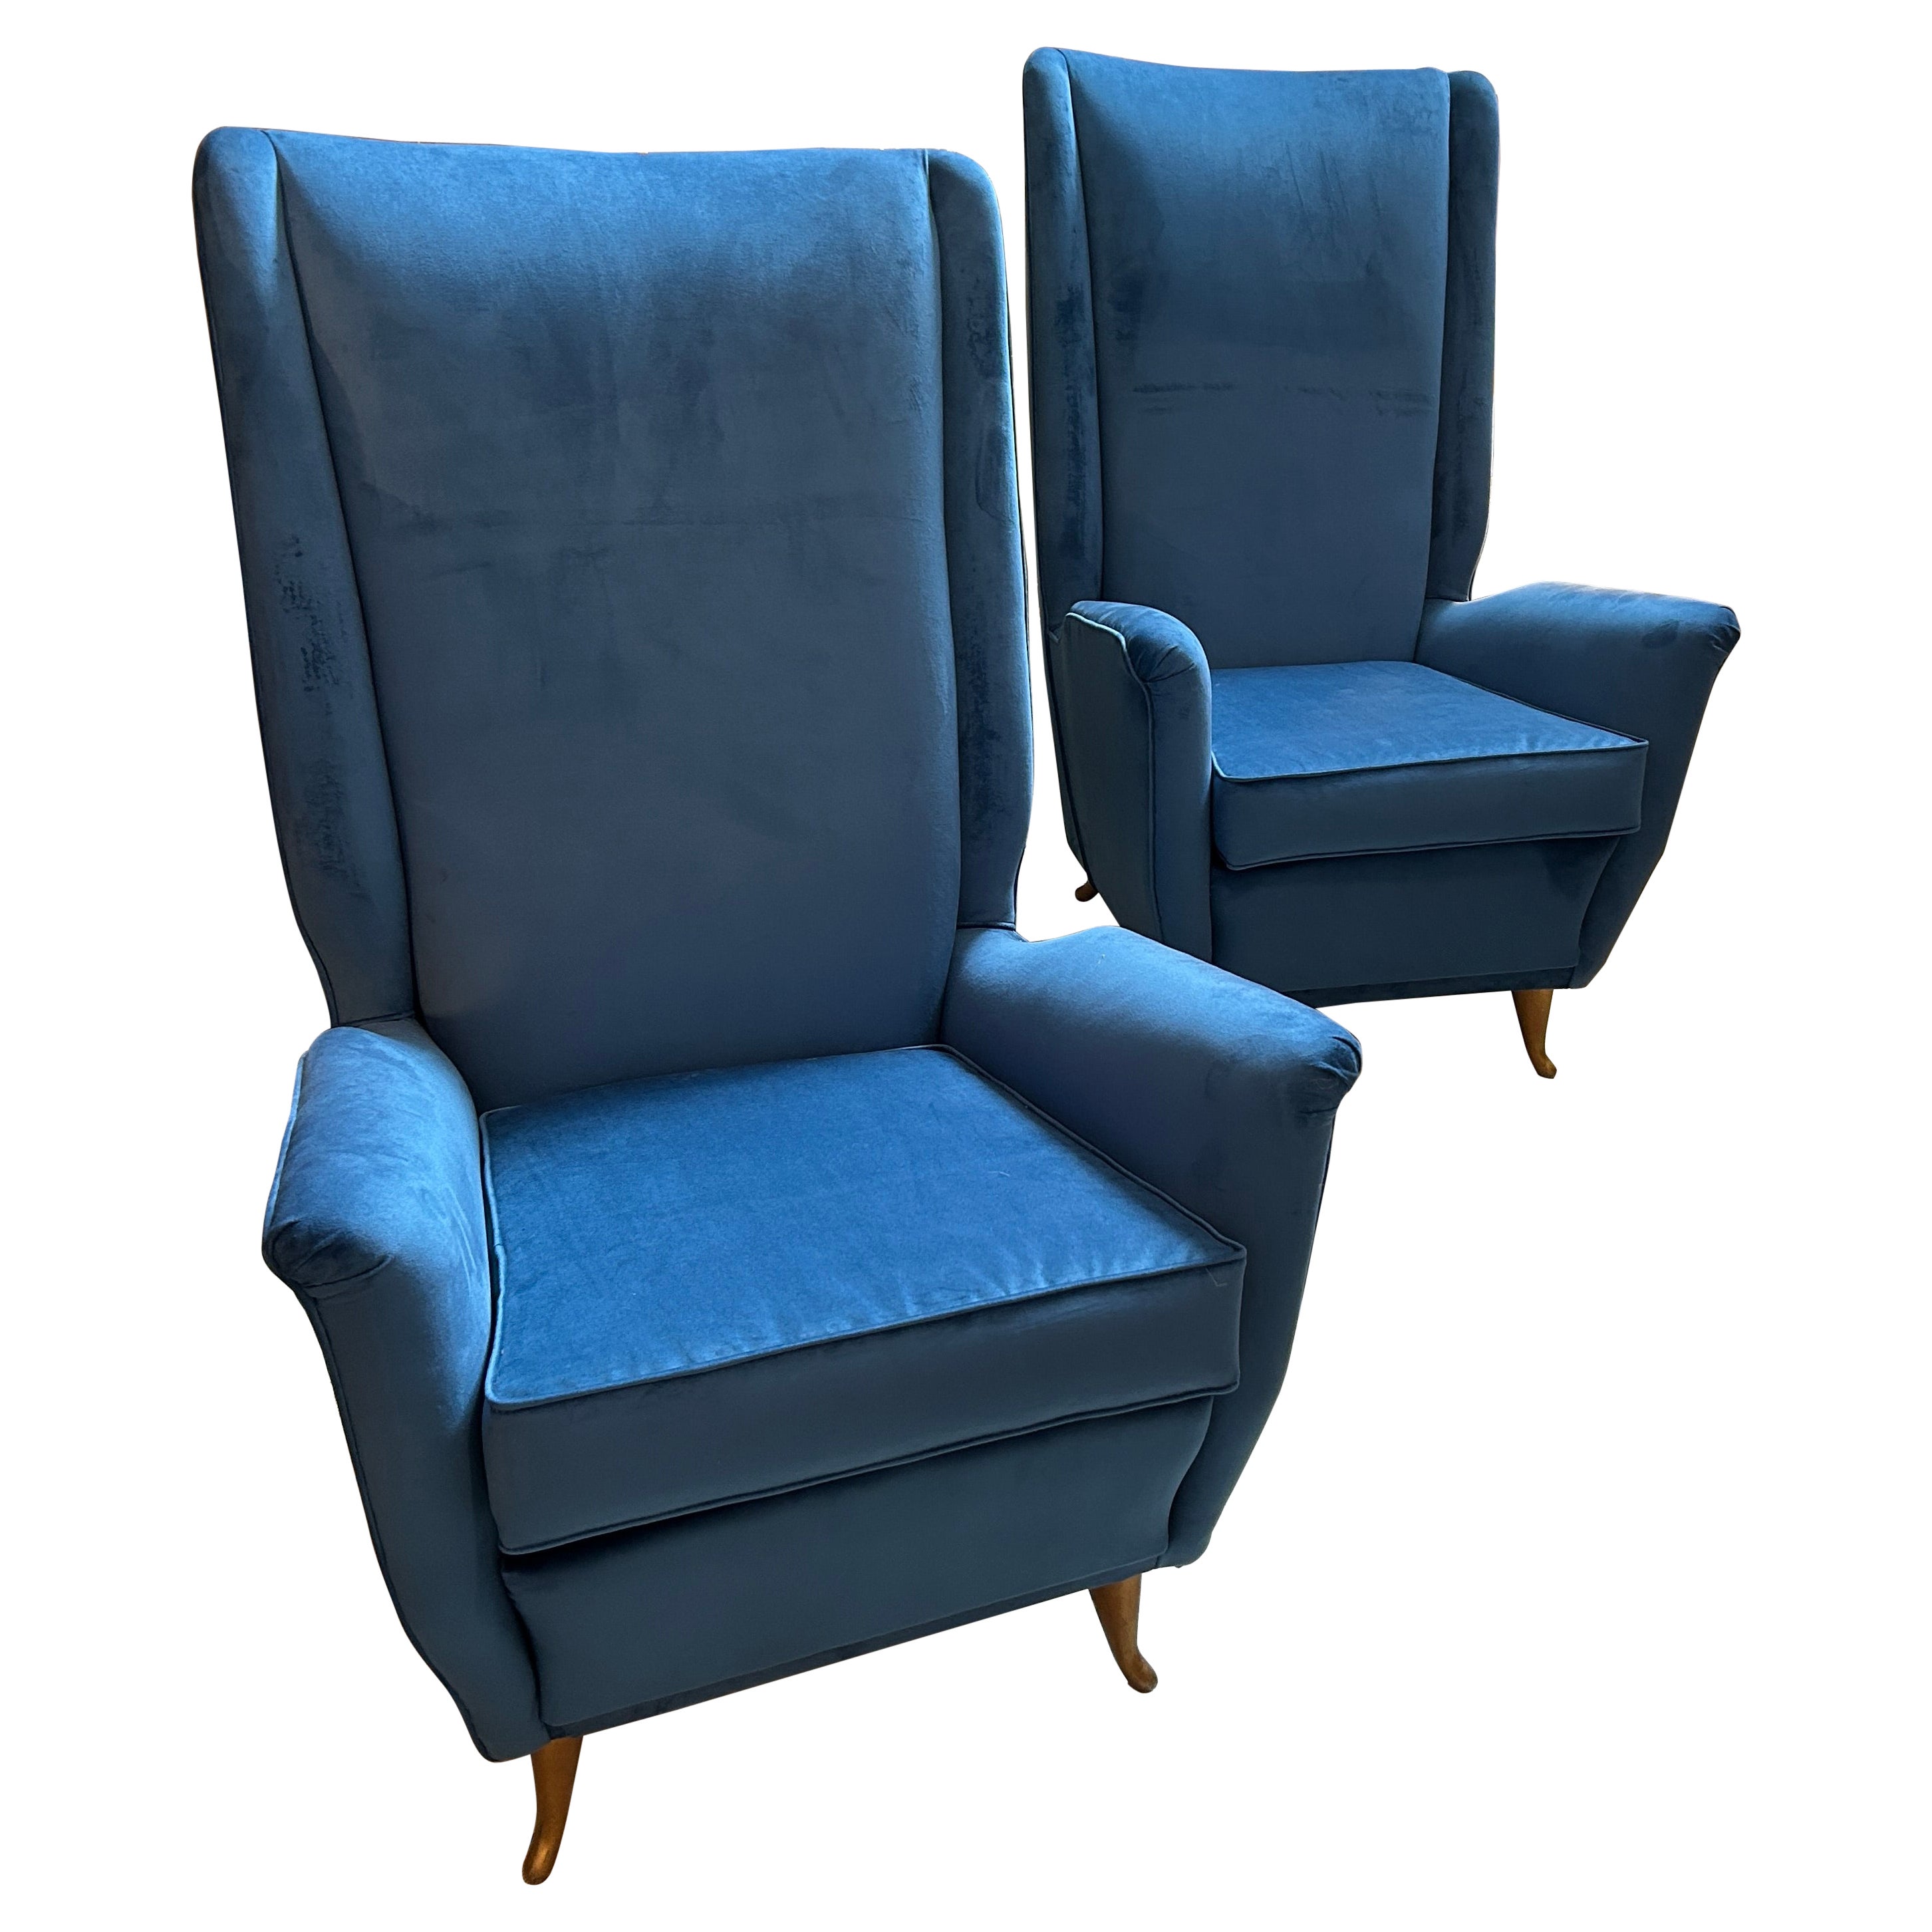 1950s Two Mid-Century Modern High Back Armchairs by Gio Ponti for Isa Bergamo For Sale